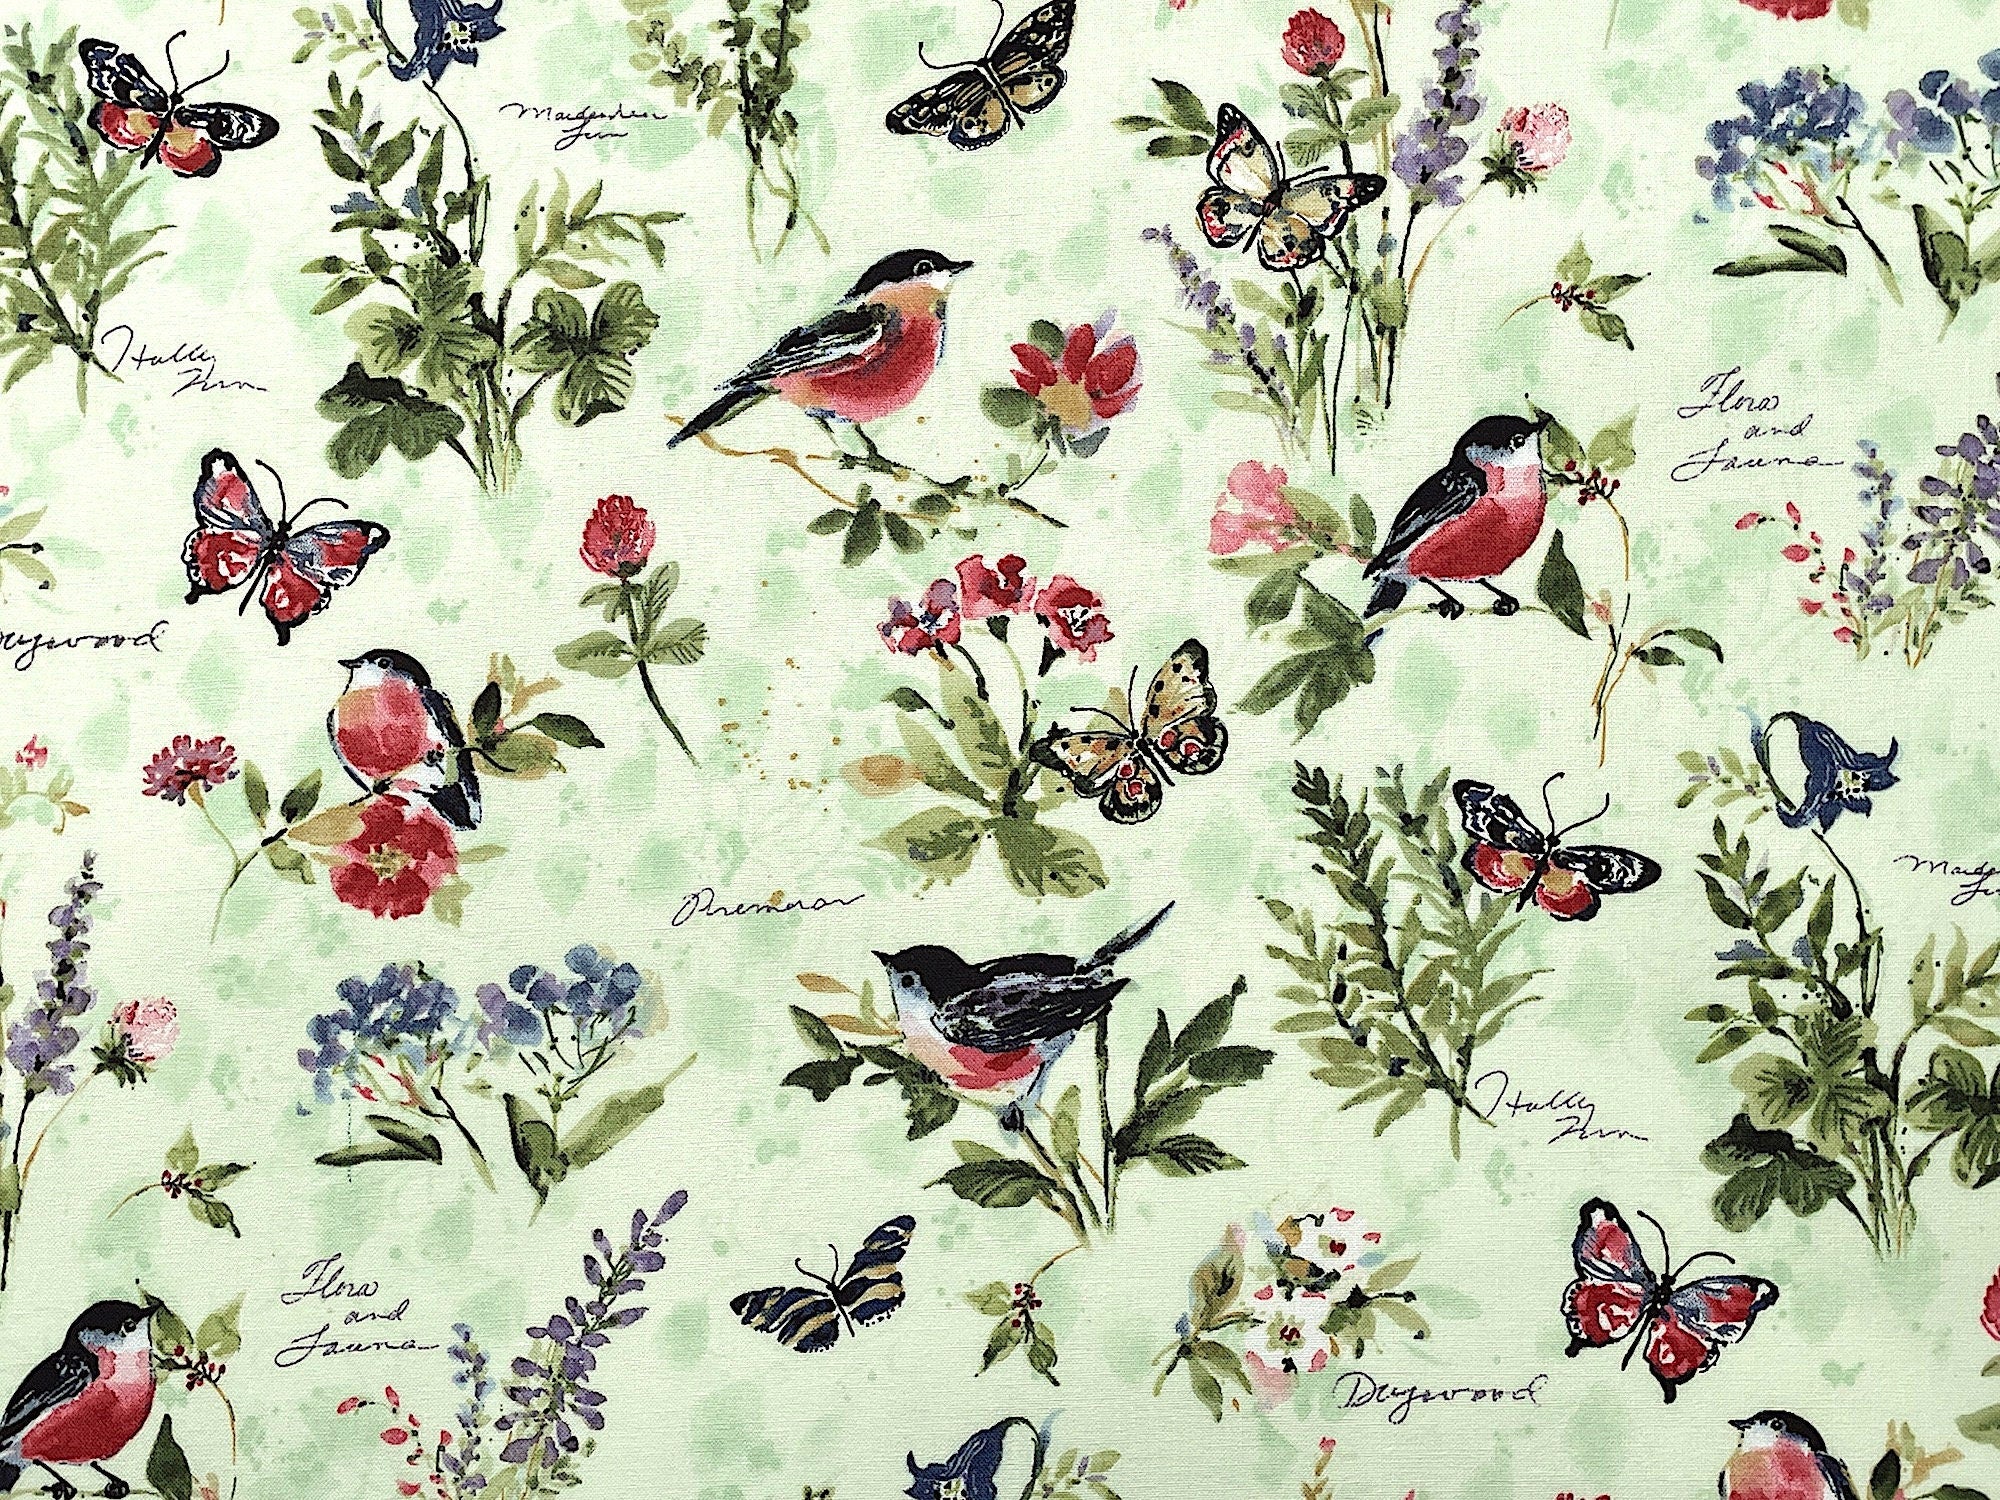 Cotton fabric covered with birds, butterflies and flowers.